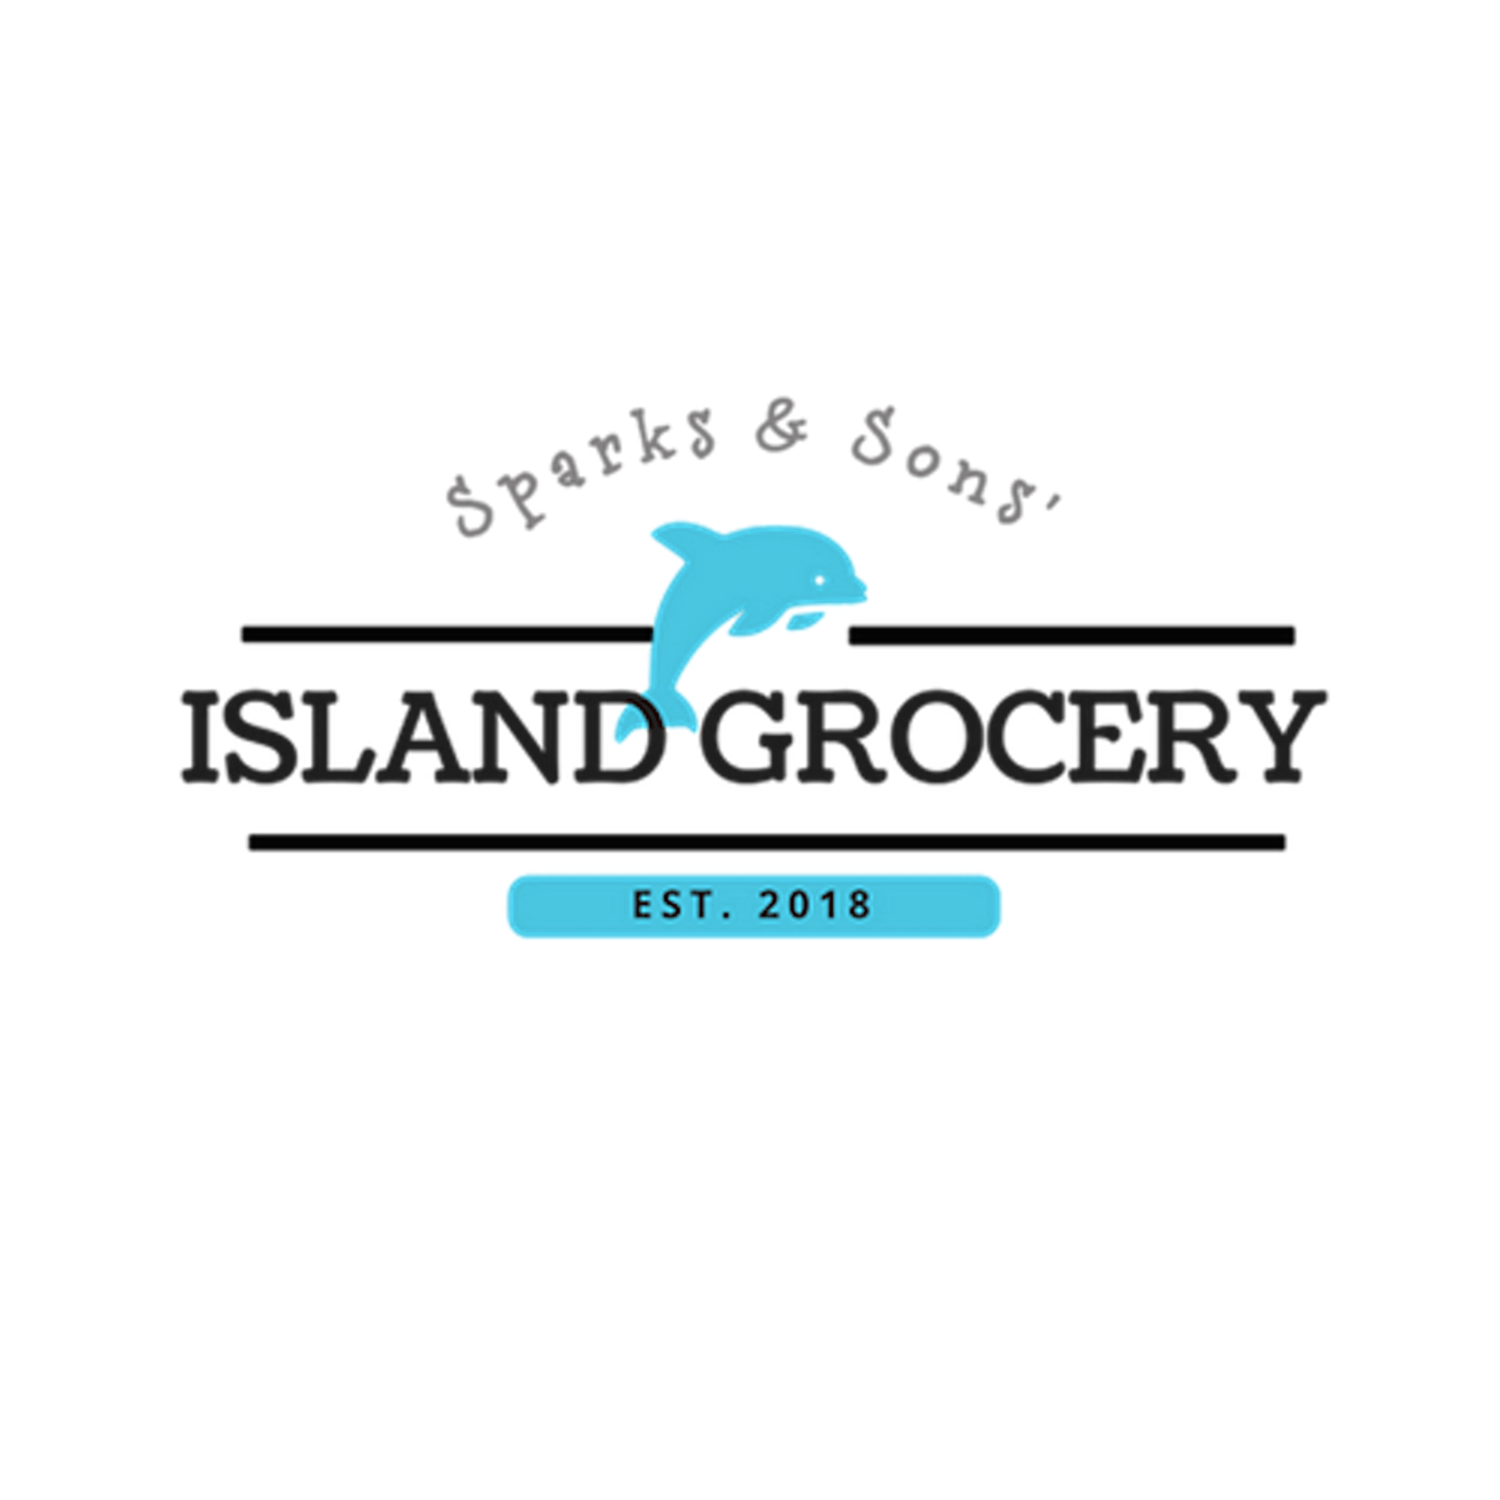 Sparks & Sons Island Grocery